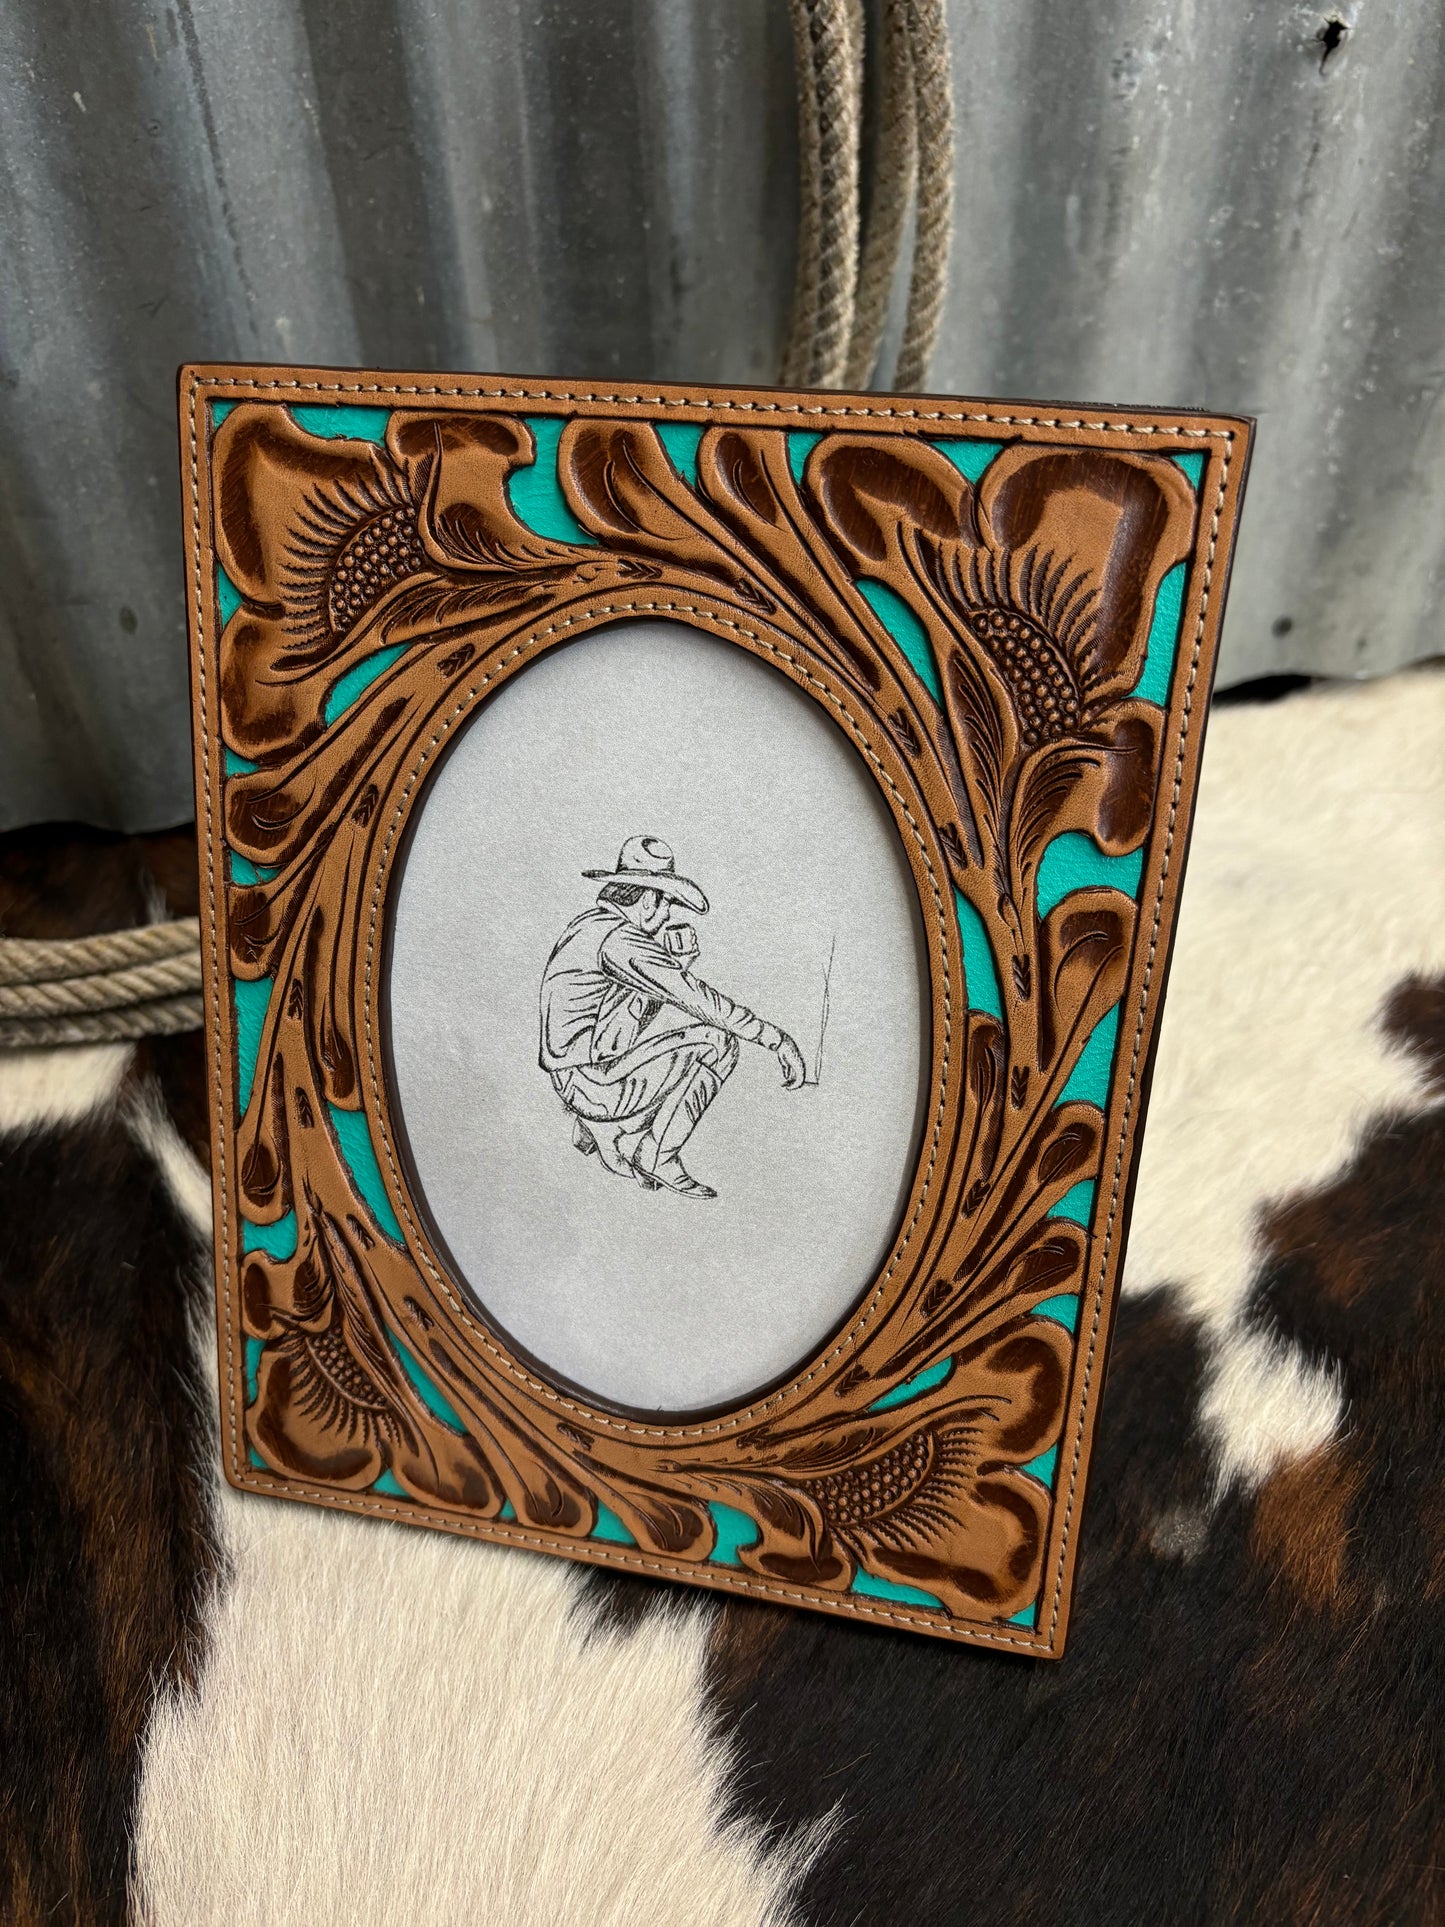 The Tooled Leather Turquoise Large Frame